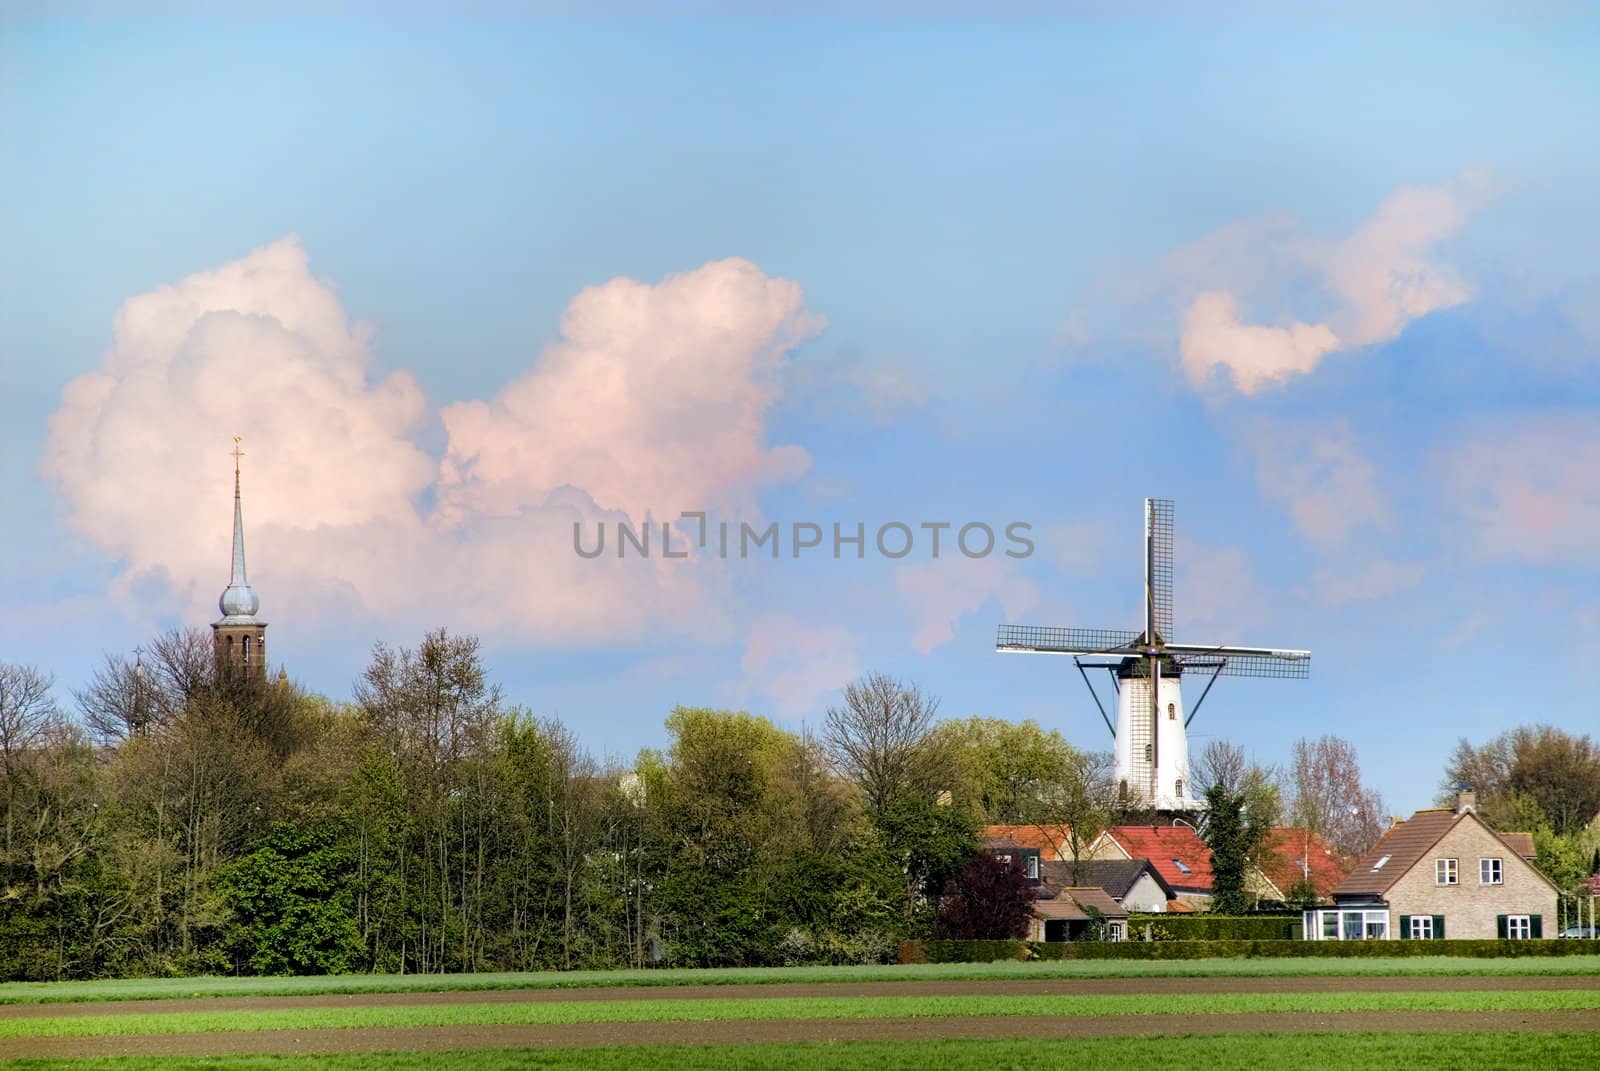 landscape sight on little village with windmill and churchtower